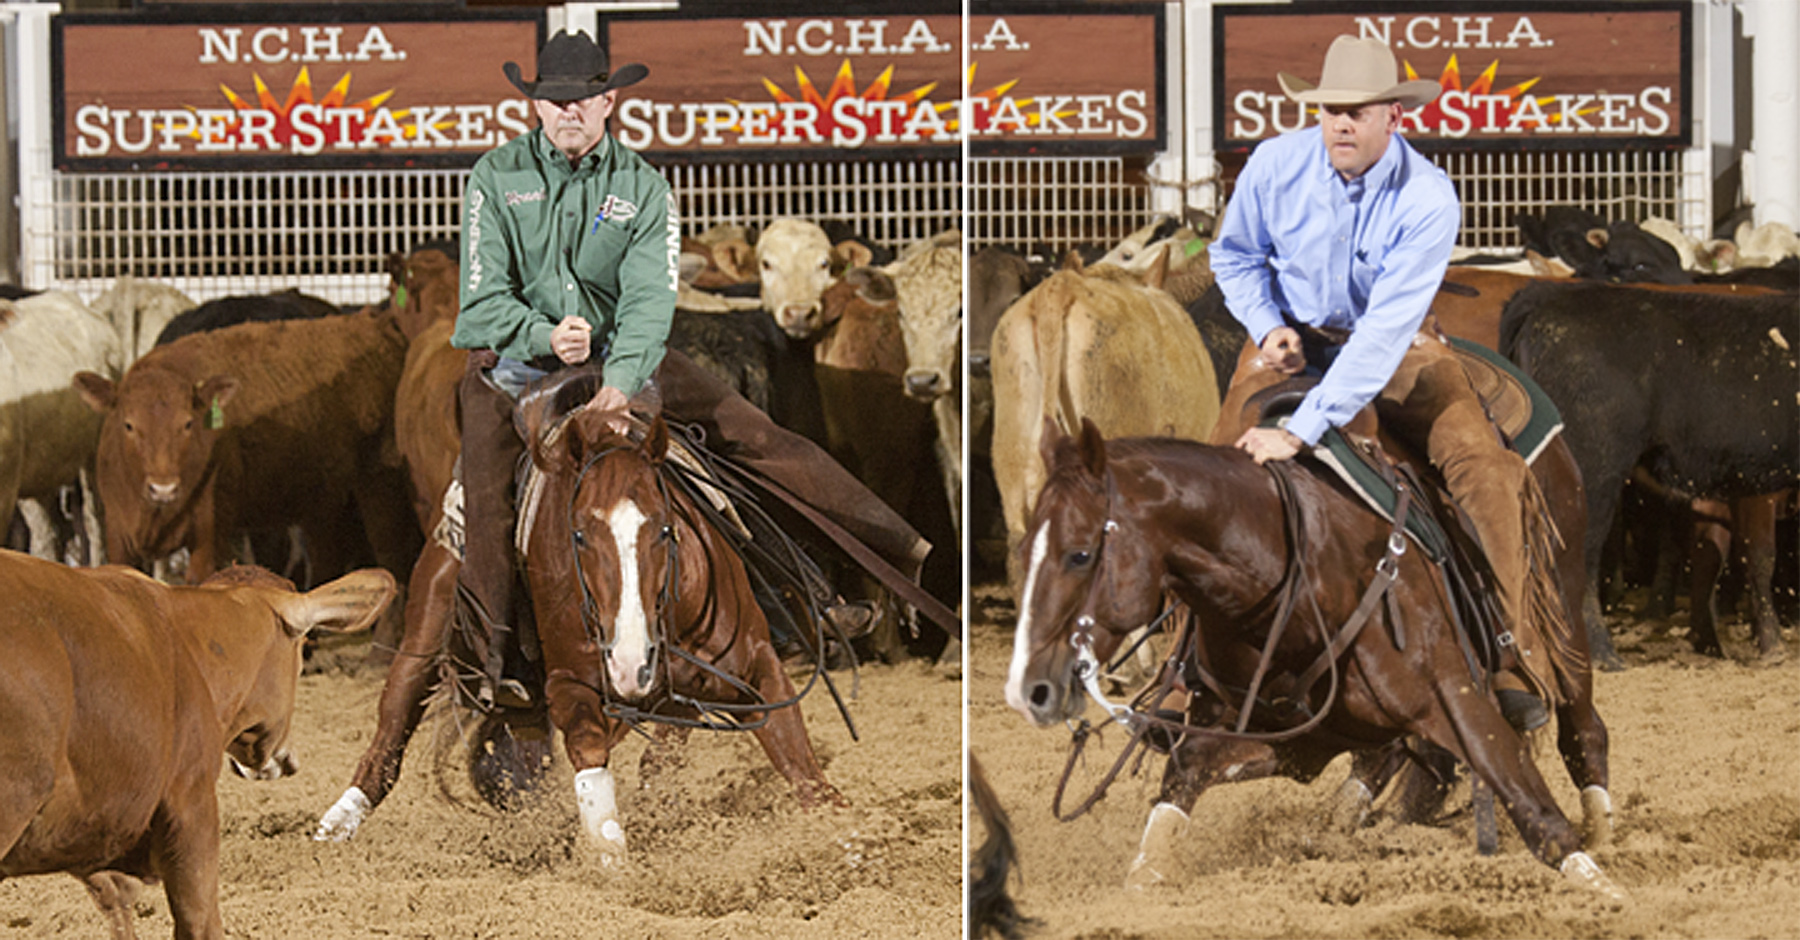 Last year, Smooth Talkin Style and Dont Stopp Believin were co-champions of the NCHA Super Stakes.